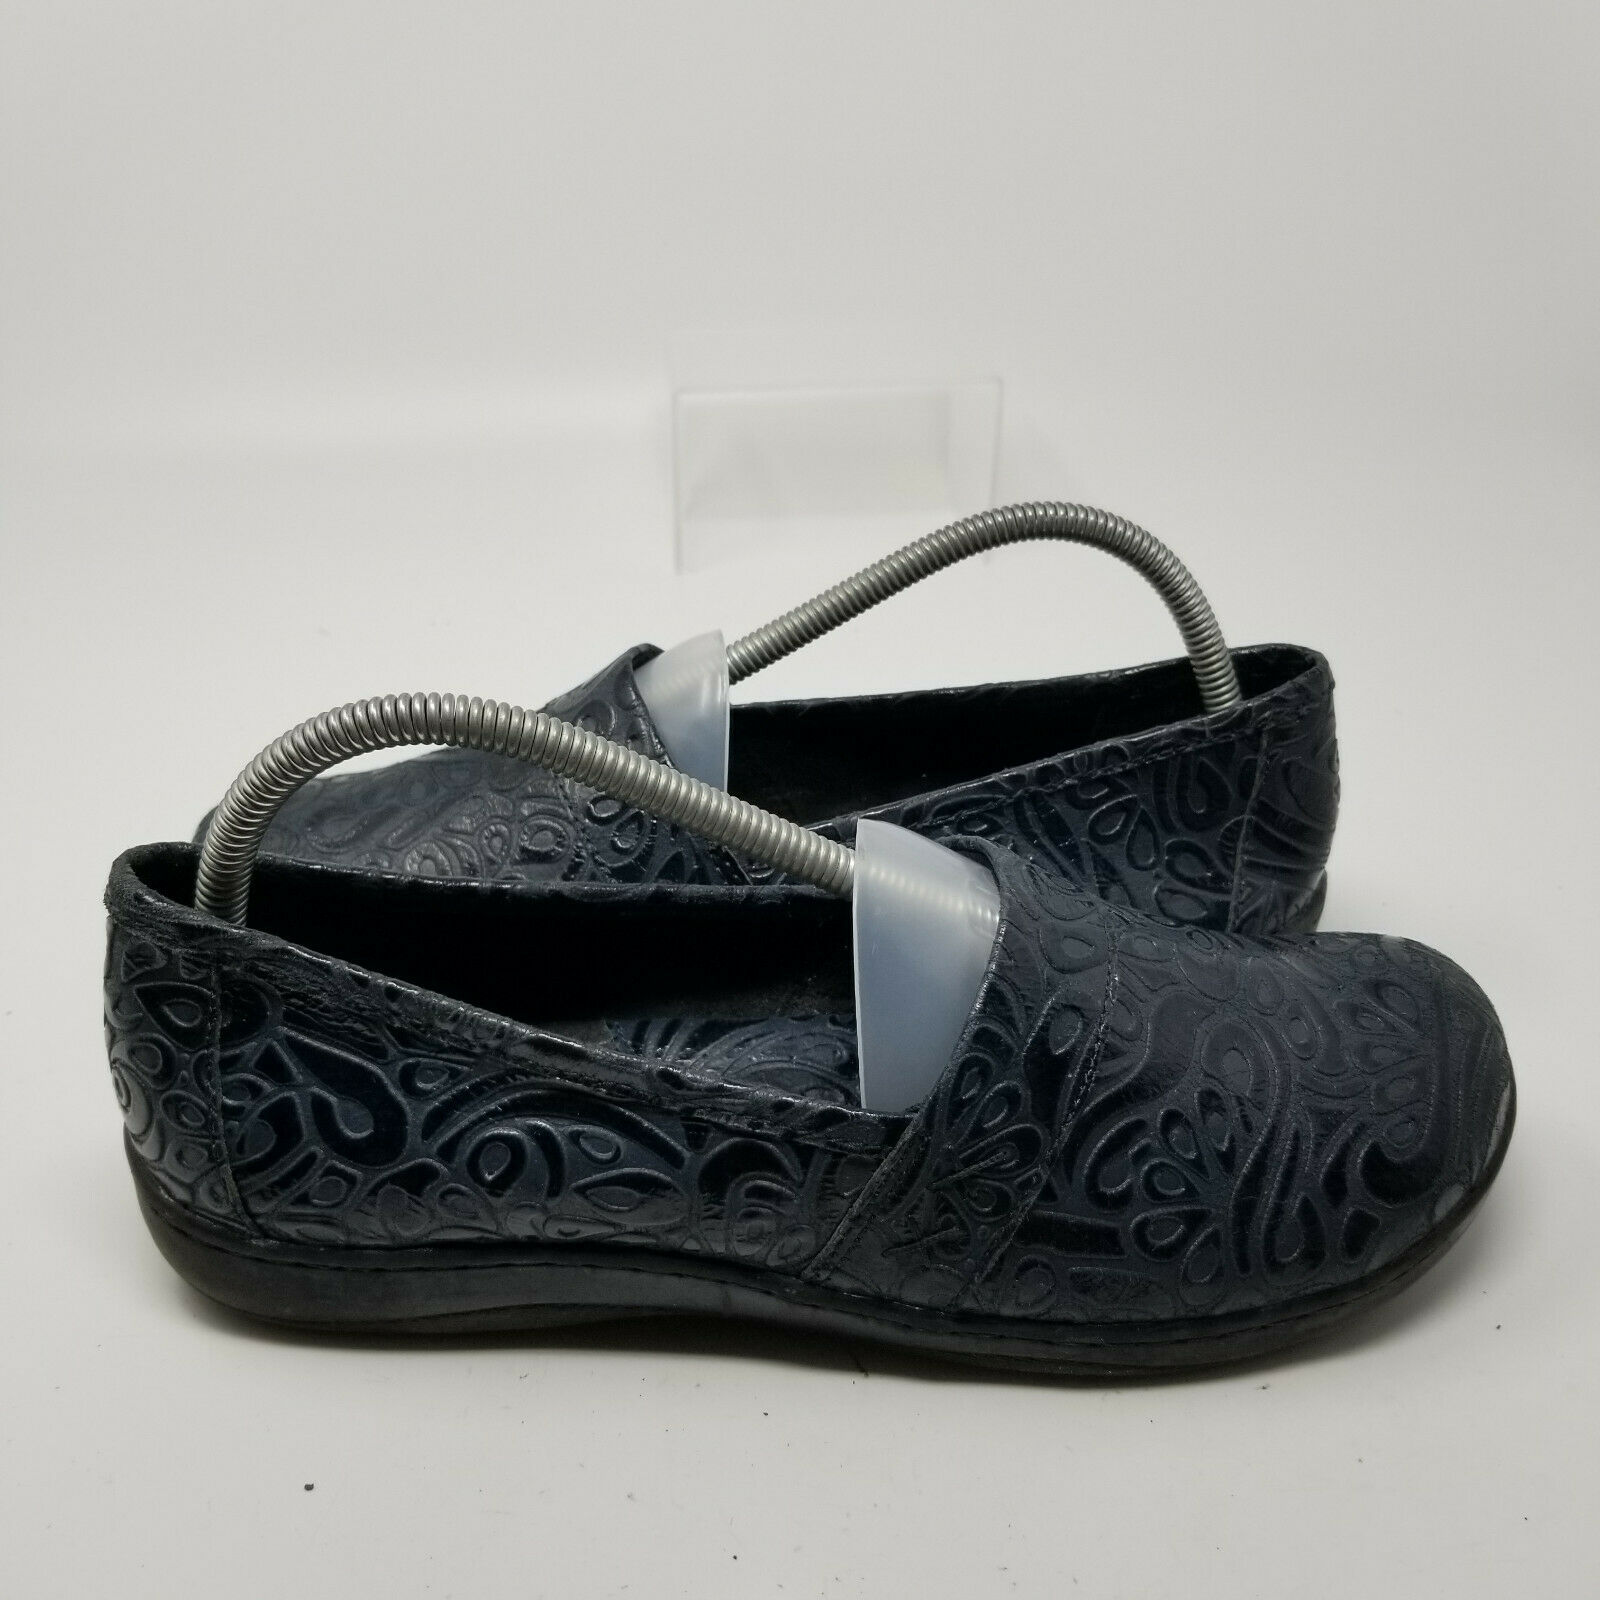 B.O.C. Born Black Leather Embroidery Slip On Low Walking Shoes Women Size 10 M